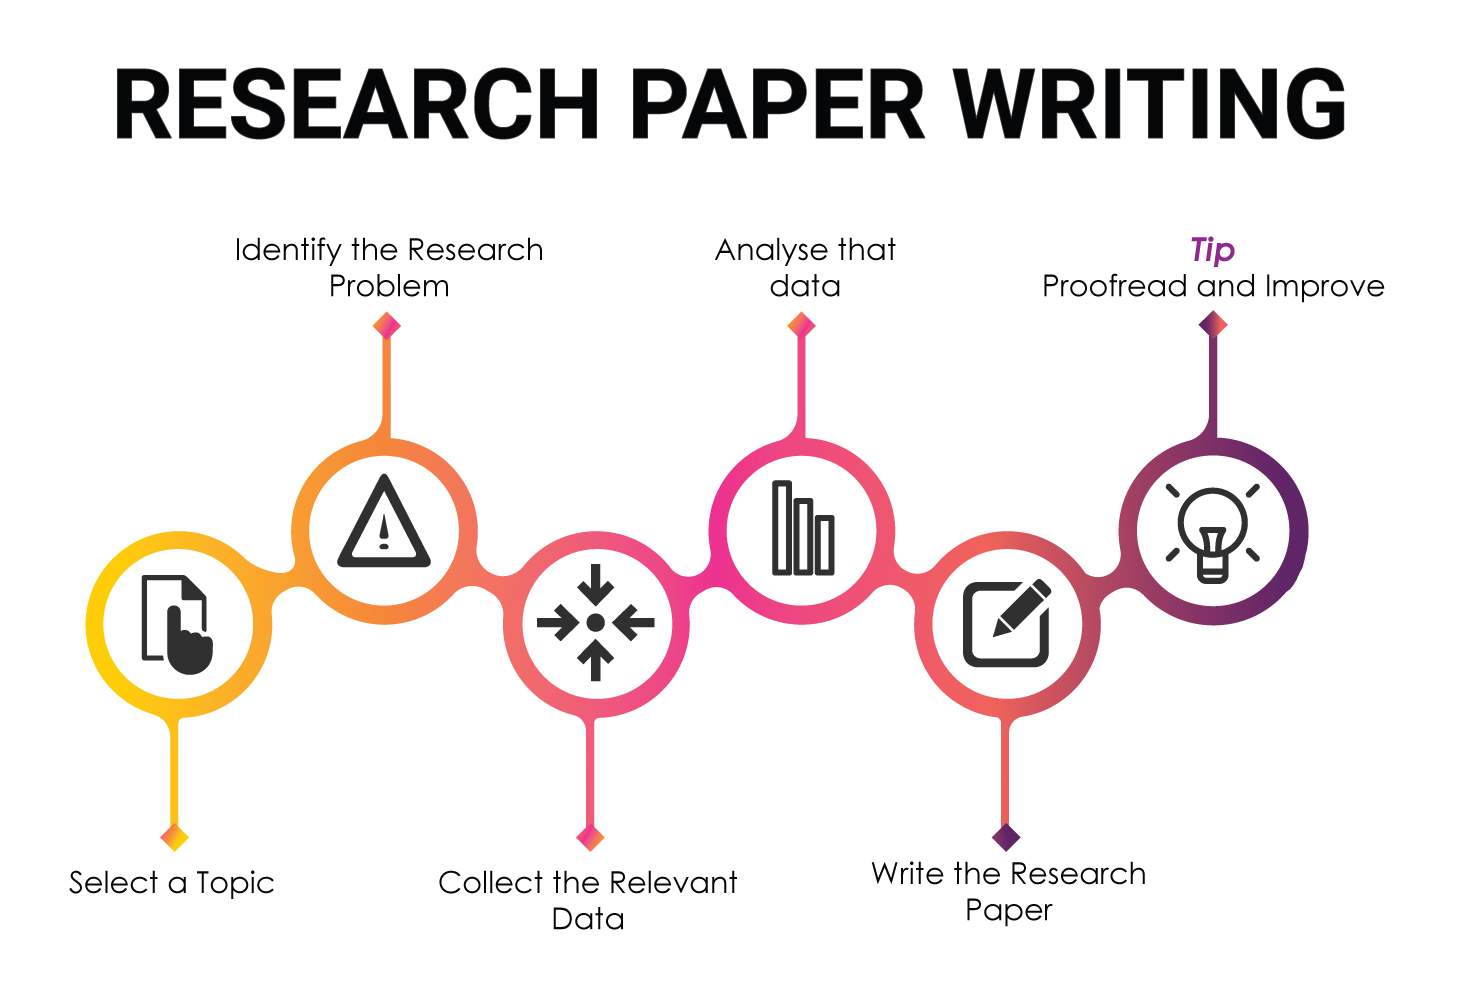 7 steps in writing research paper